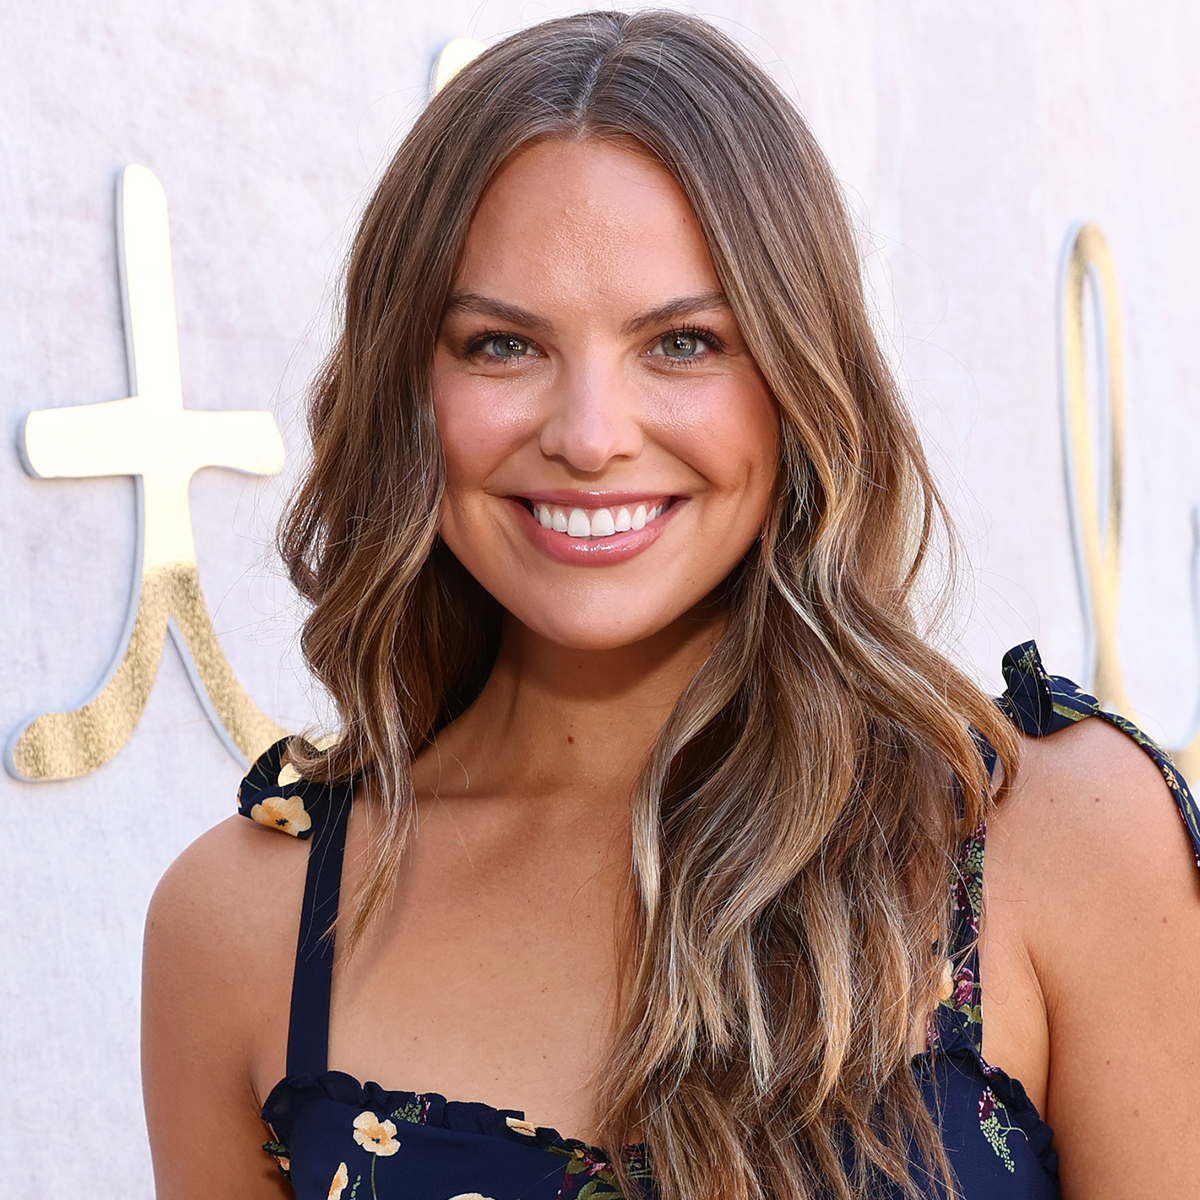 The Bachelorette's Hannah Brown Shares Her Morning Essentials